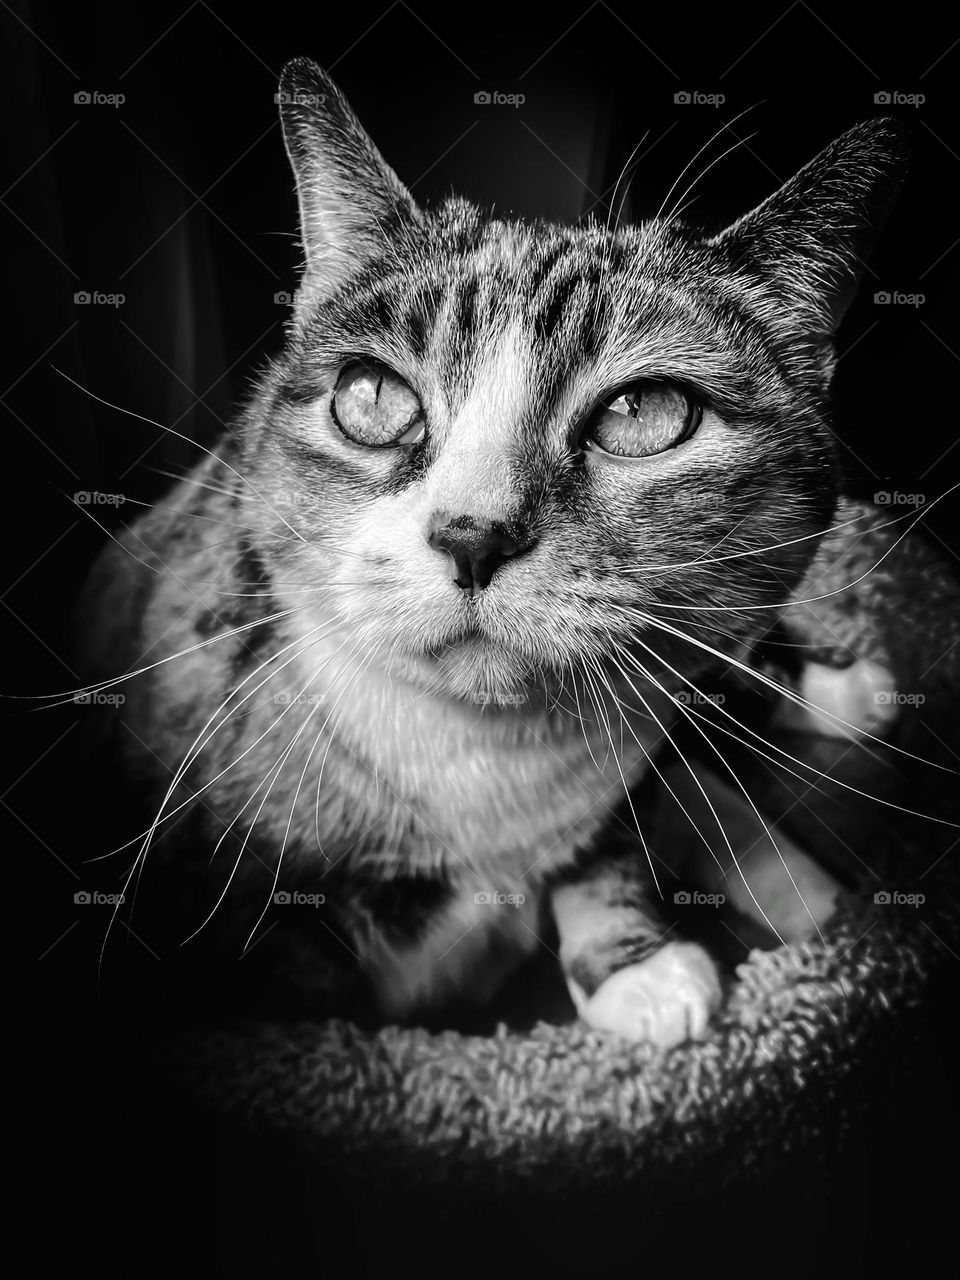 House cat patch tabby senior kitty feline big beautiful eyes b&w black and white photo picture rescue animal pet best friend phone photo no people fur tiger big whiskers adorable cute animals pets  